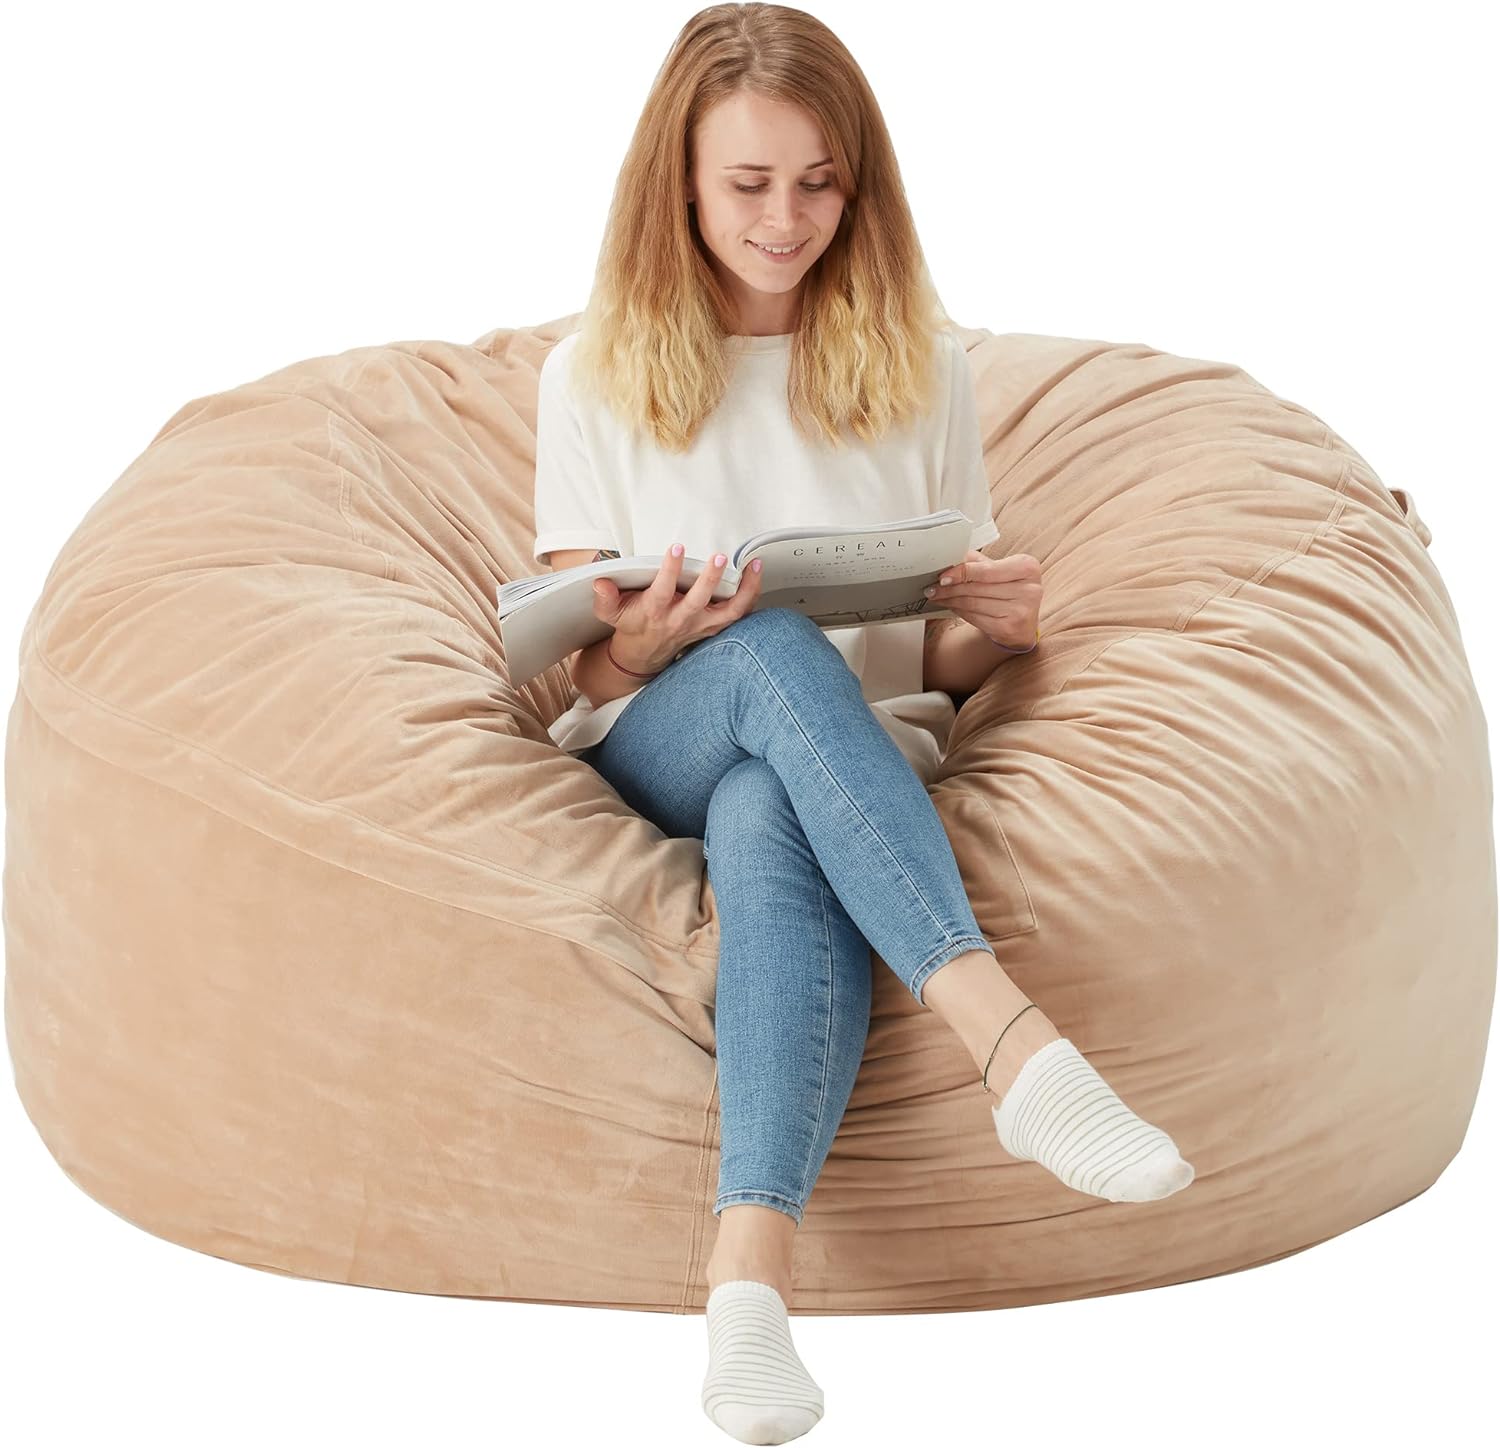 Homguava Bean Bag Chair: Large 5' Bean Bags with Memory Foam Filled, Large Beanbag Chairs Soft Sofa with Dutch Velet Cover-56×56"×36" (Khaki)